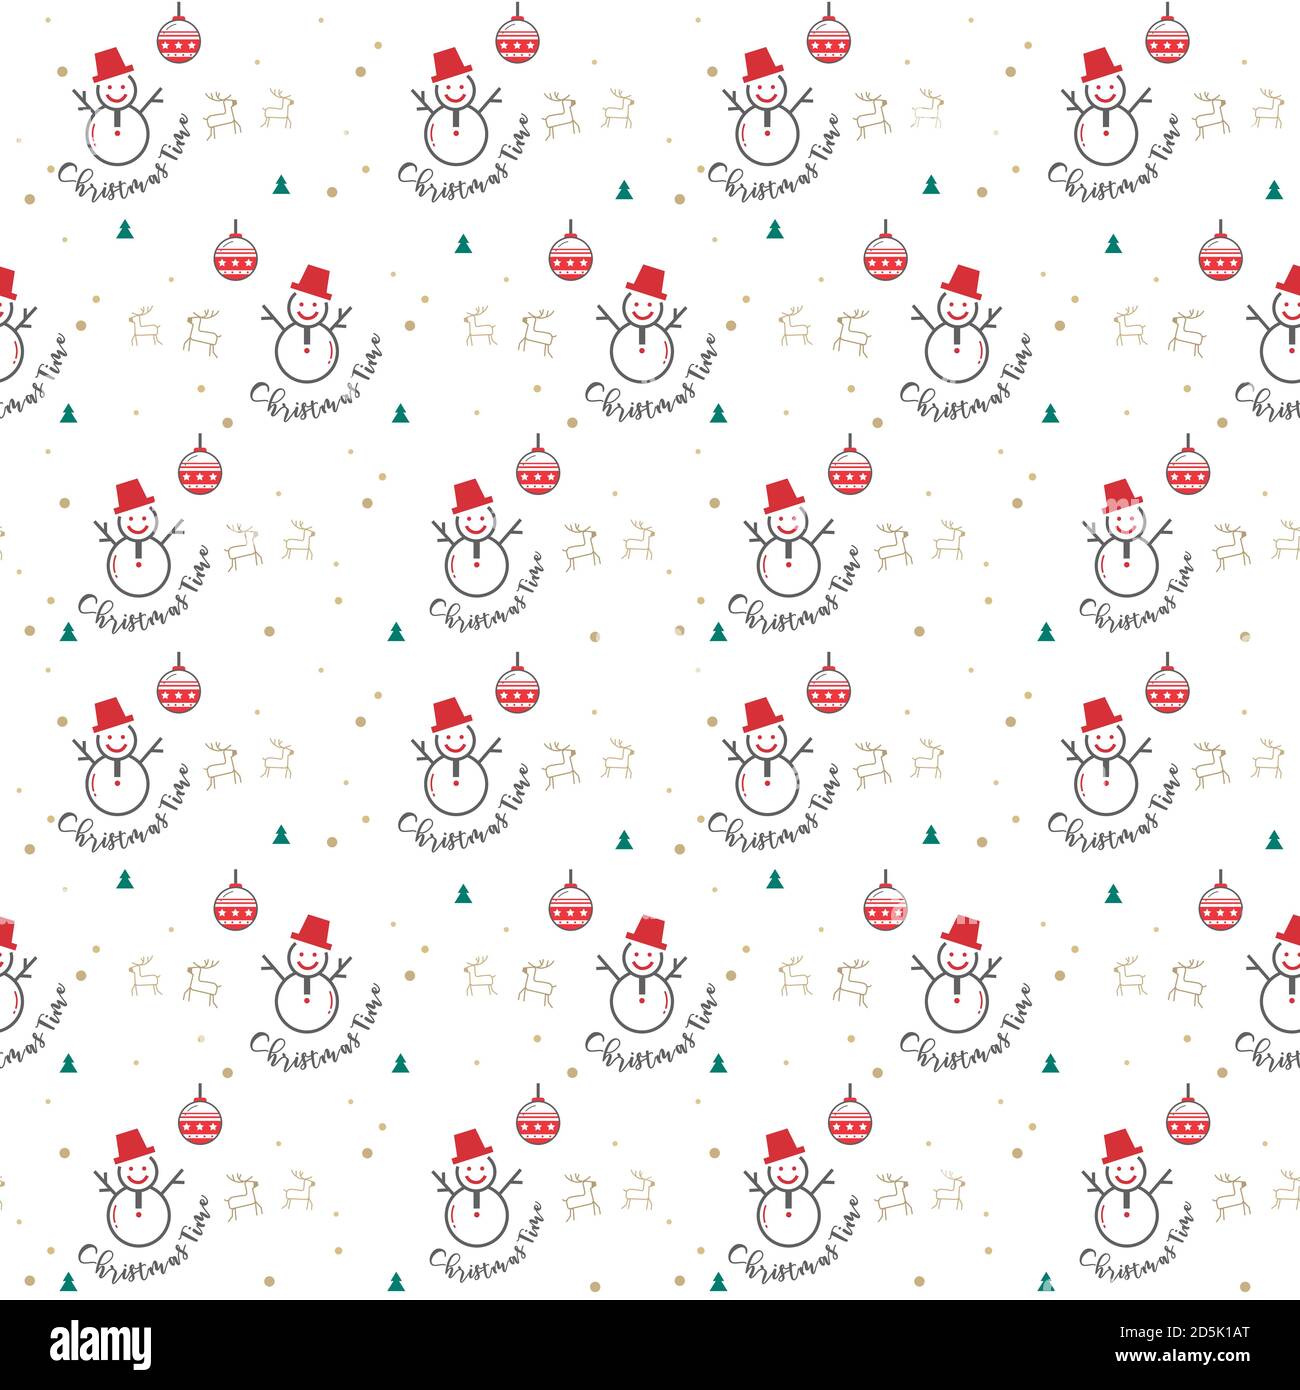 Snowman Christmas seamless pattern background for gift wrapping paper, digital scrapbook etc. Stock Vector